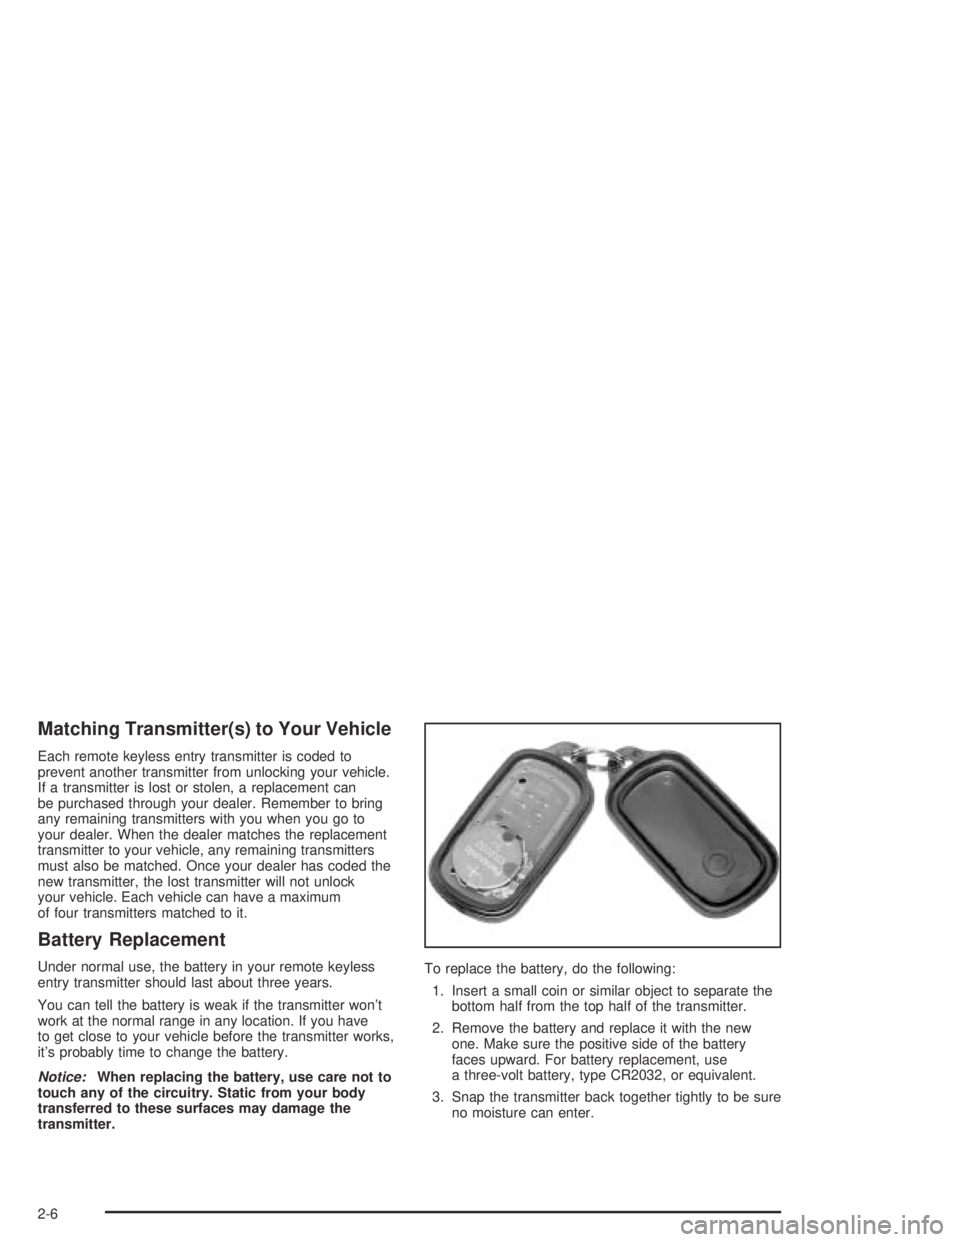 PONTIAC VIBE 2005  Owners Manual Matching Transmitter(s) to Your Vehicle
Each remote keyless entry transmitter is coded to
prevent another transmitter from unlocking your vehicle.
If a transmitter is lost or stolen, a replacement can